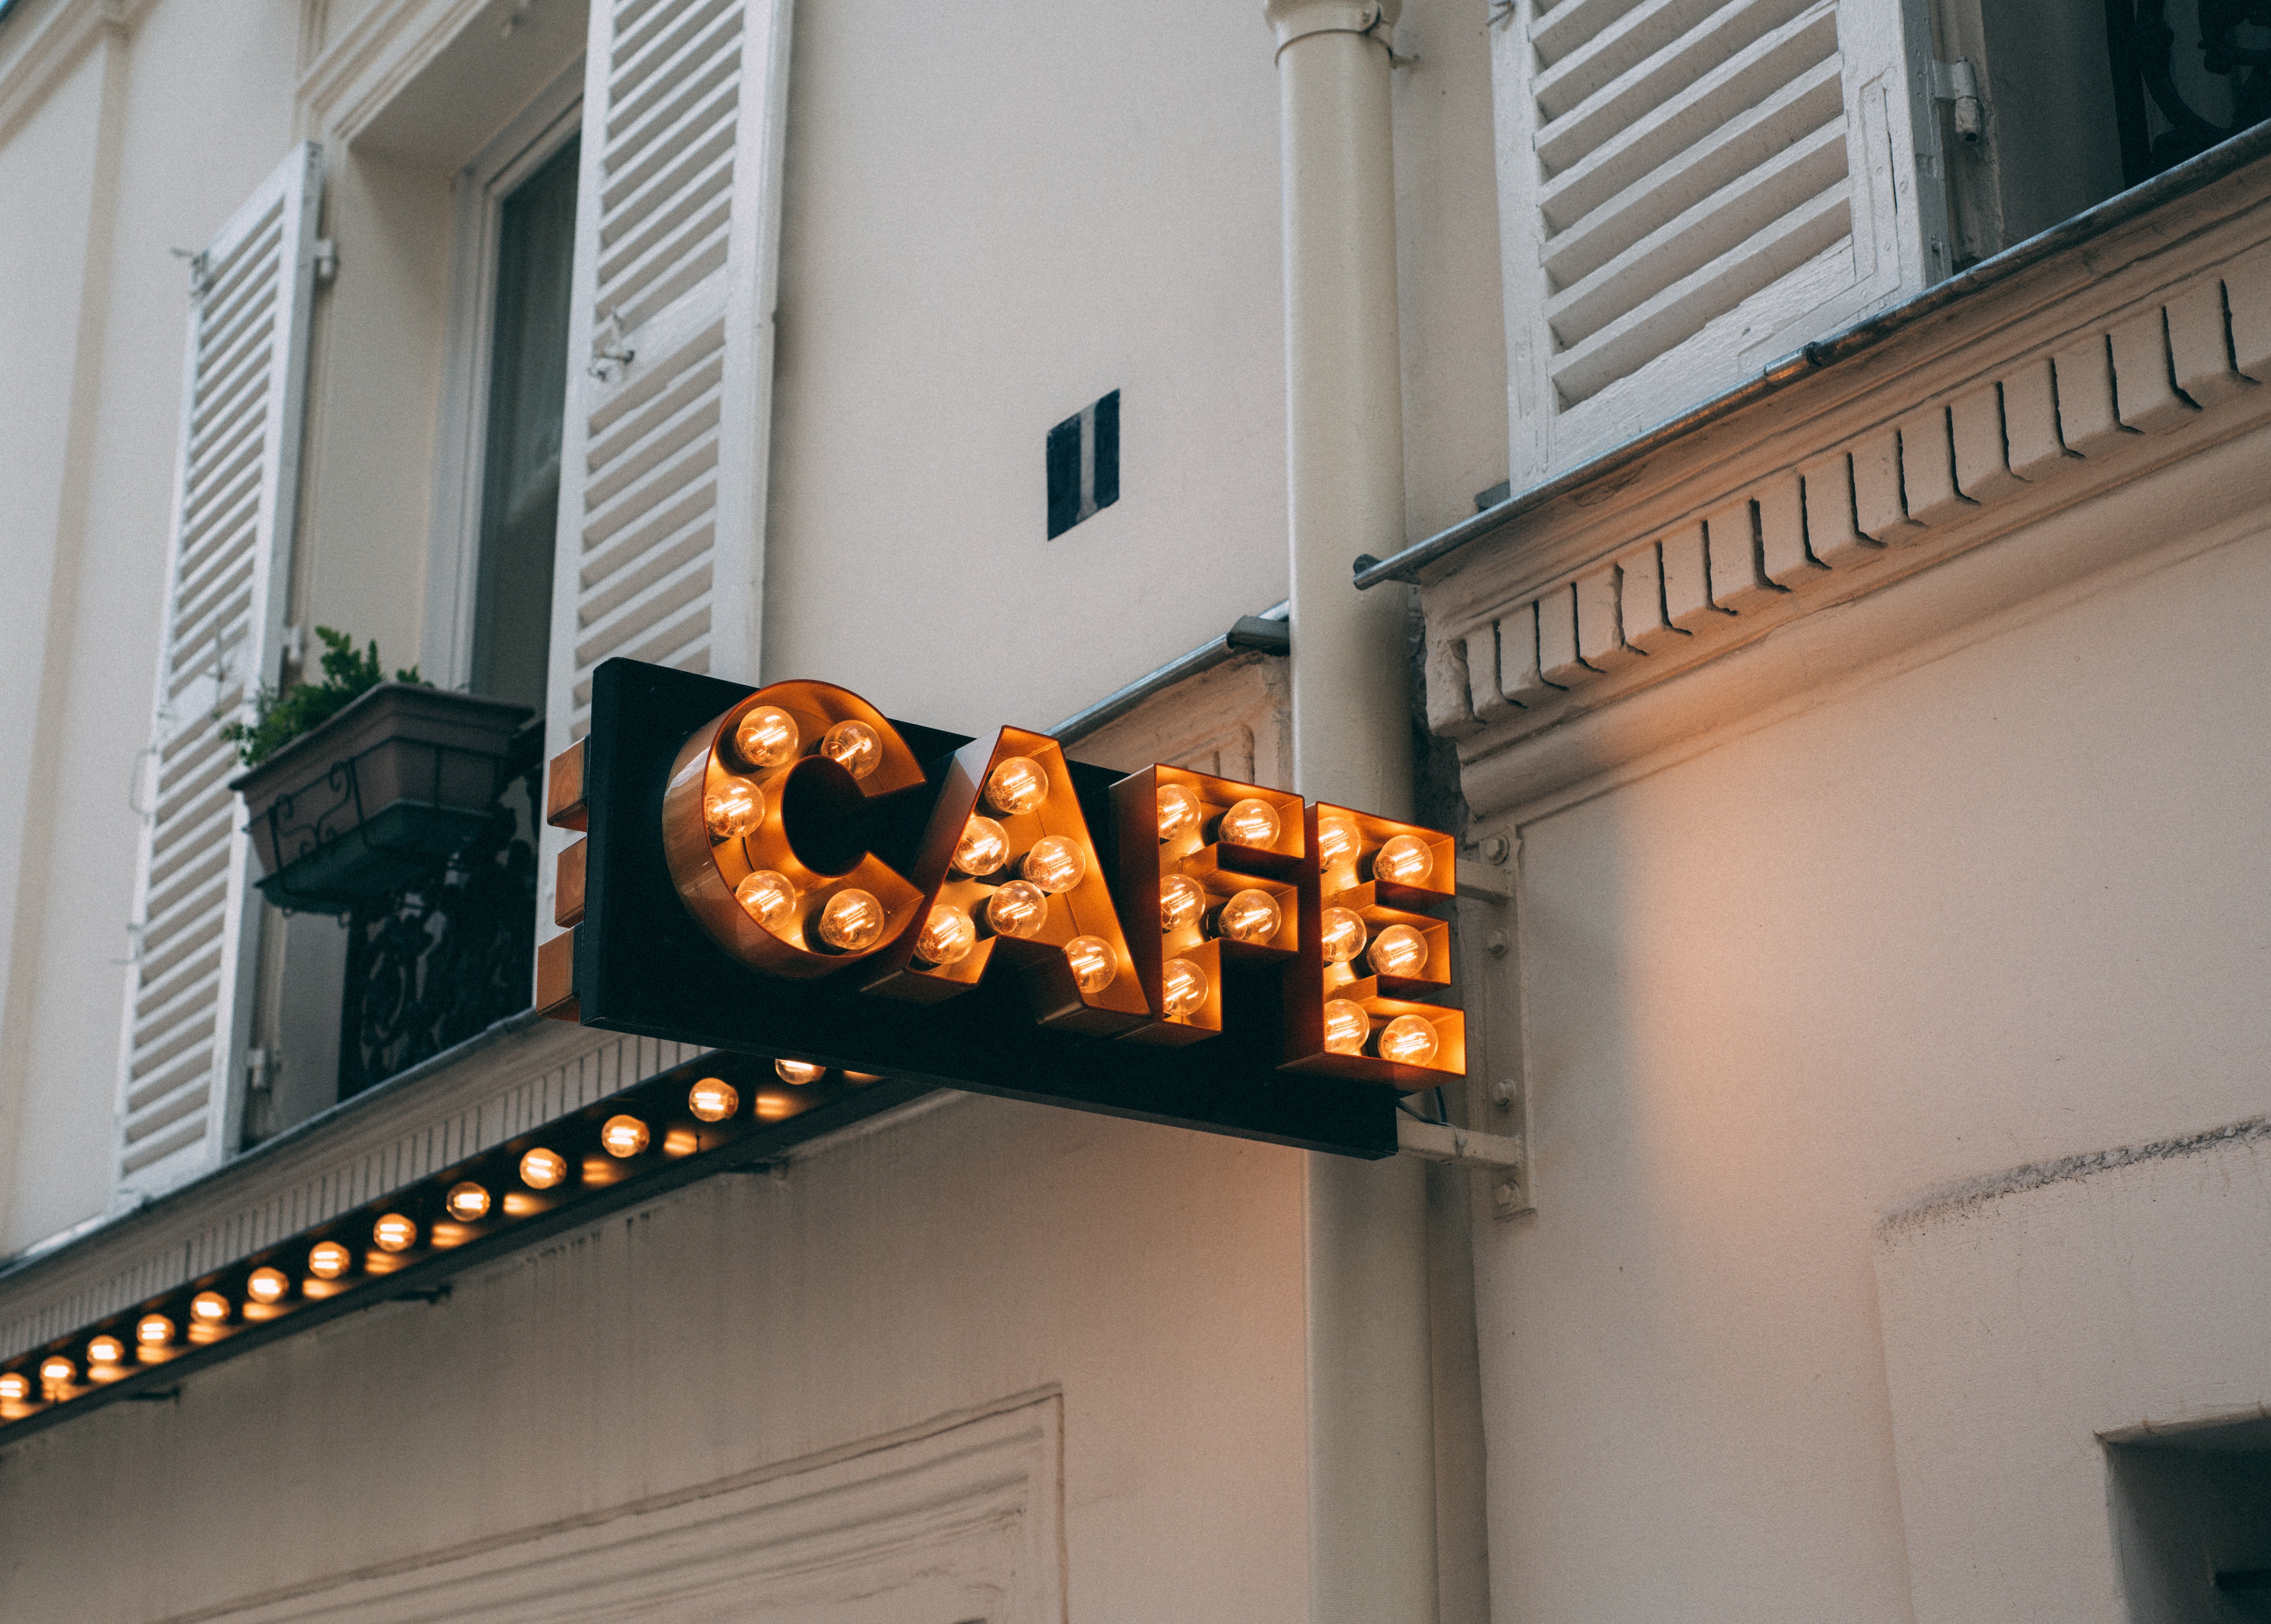 Carrie and Sandra went to a nearby cafe | Photo: Pexels